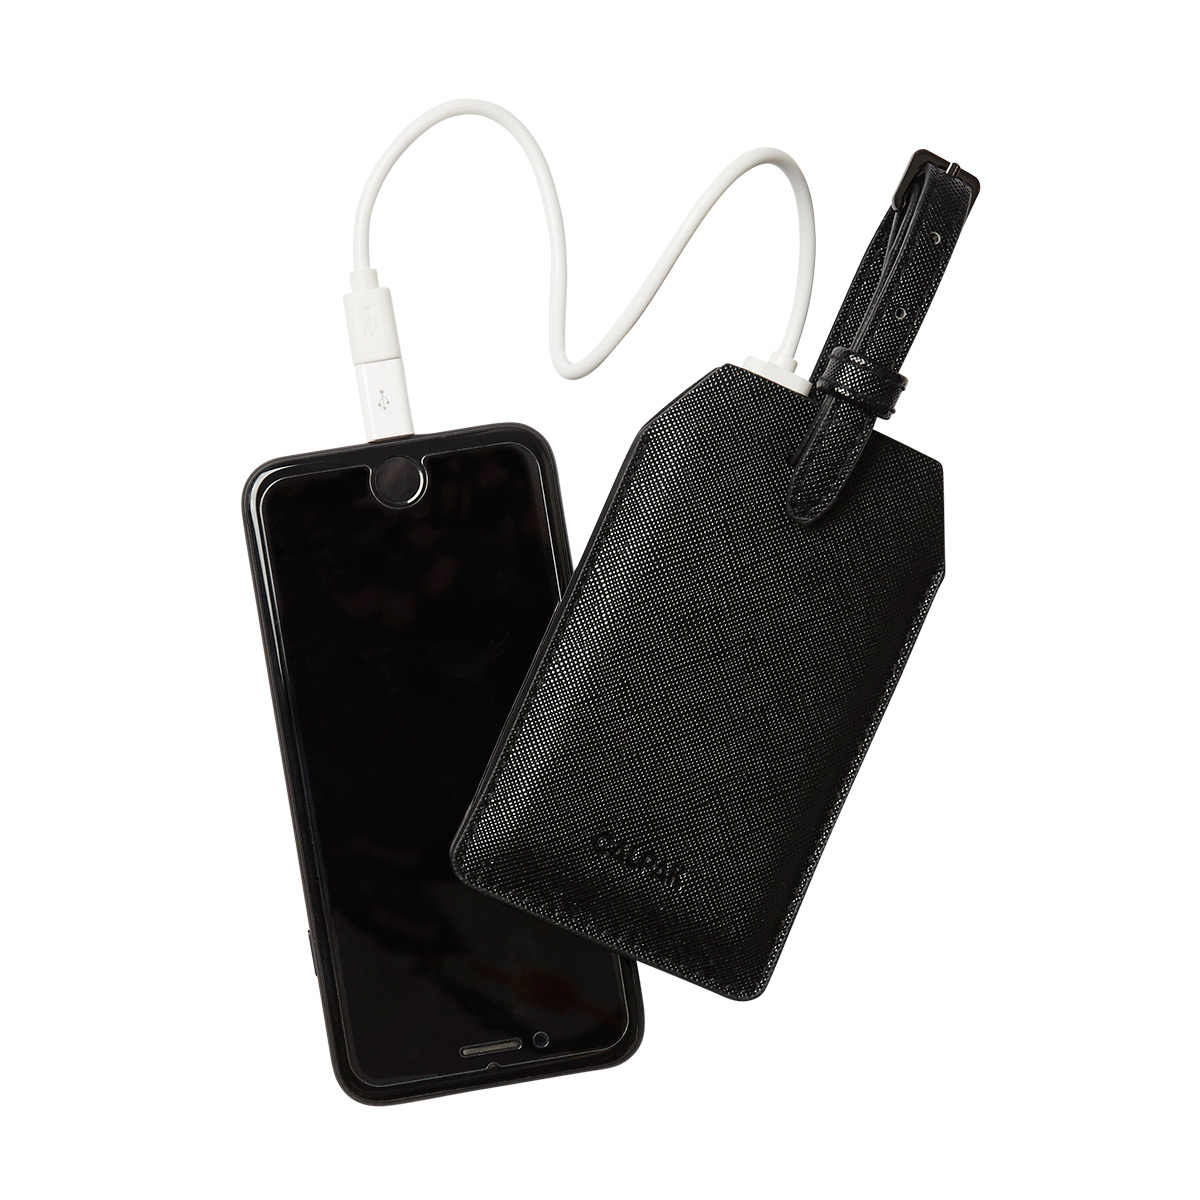 https://www.containerstore.com/catalogimages/490833/10094793-ATA1701_LUGGAGE-TAG_BLACK_5.jpg